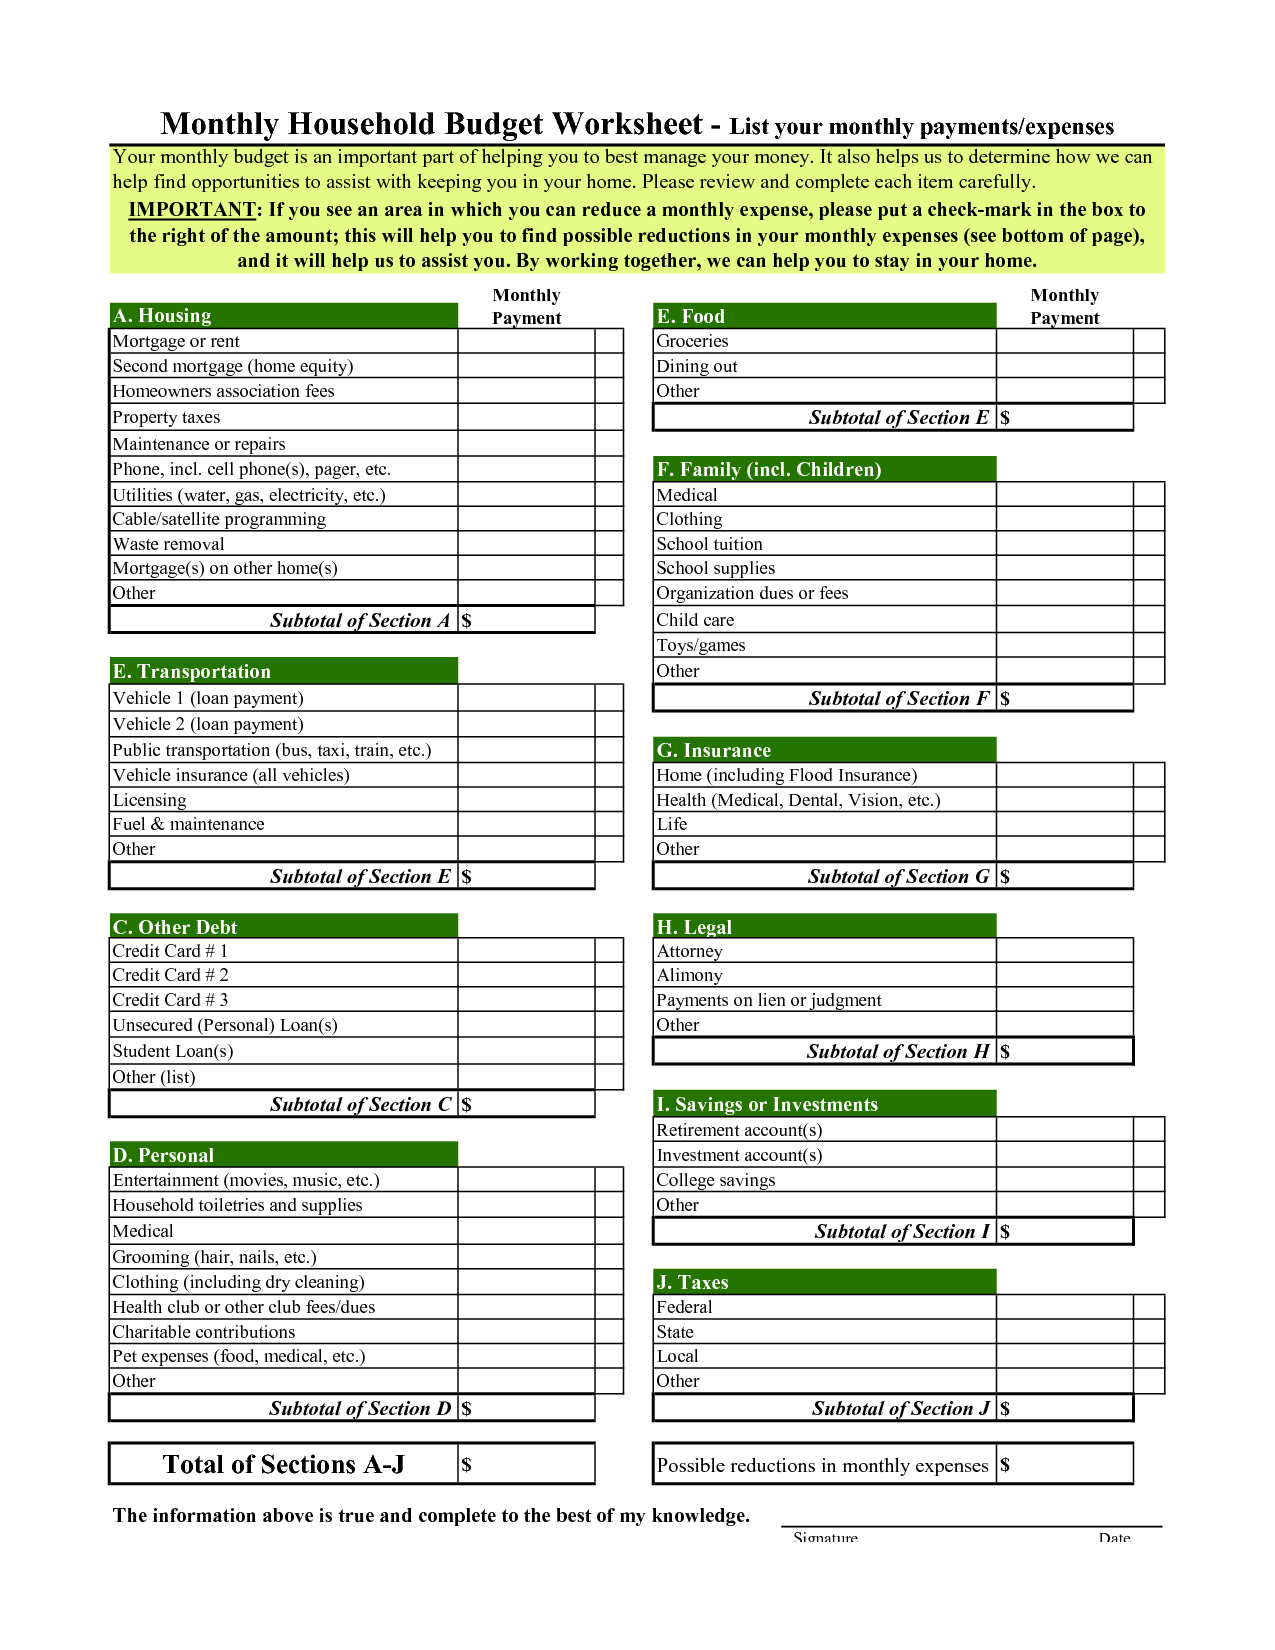 5-best-images-of-monthly-family-budget-worksheet-printable-monthly-budget-worksheet-free